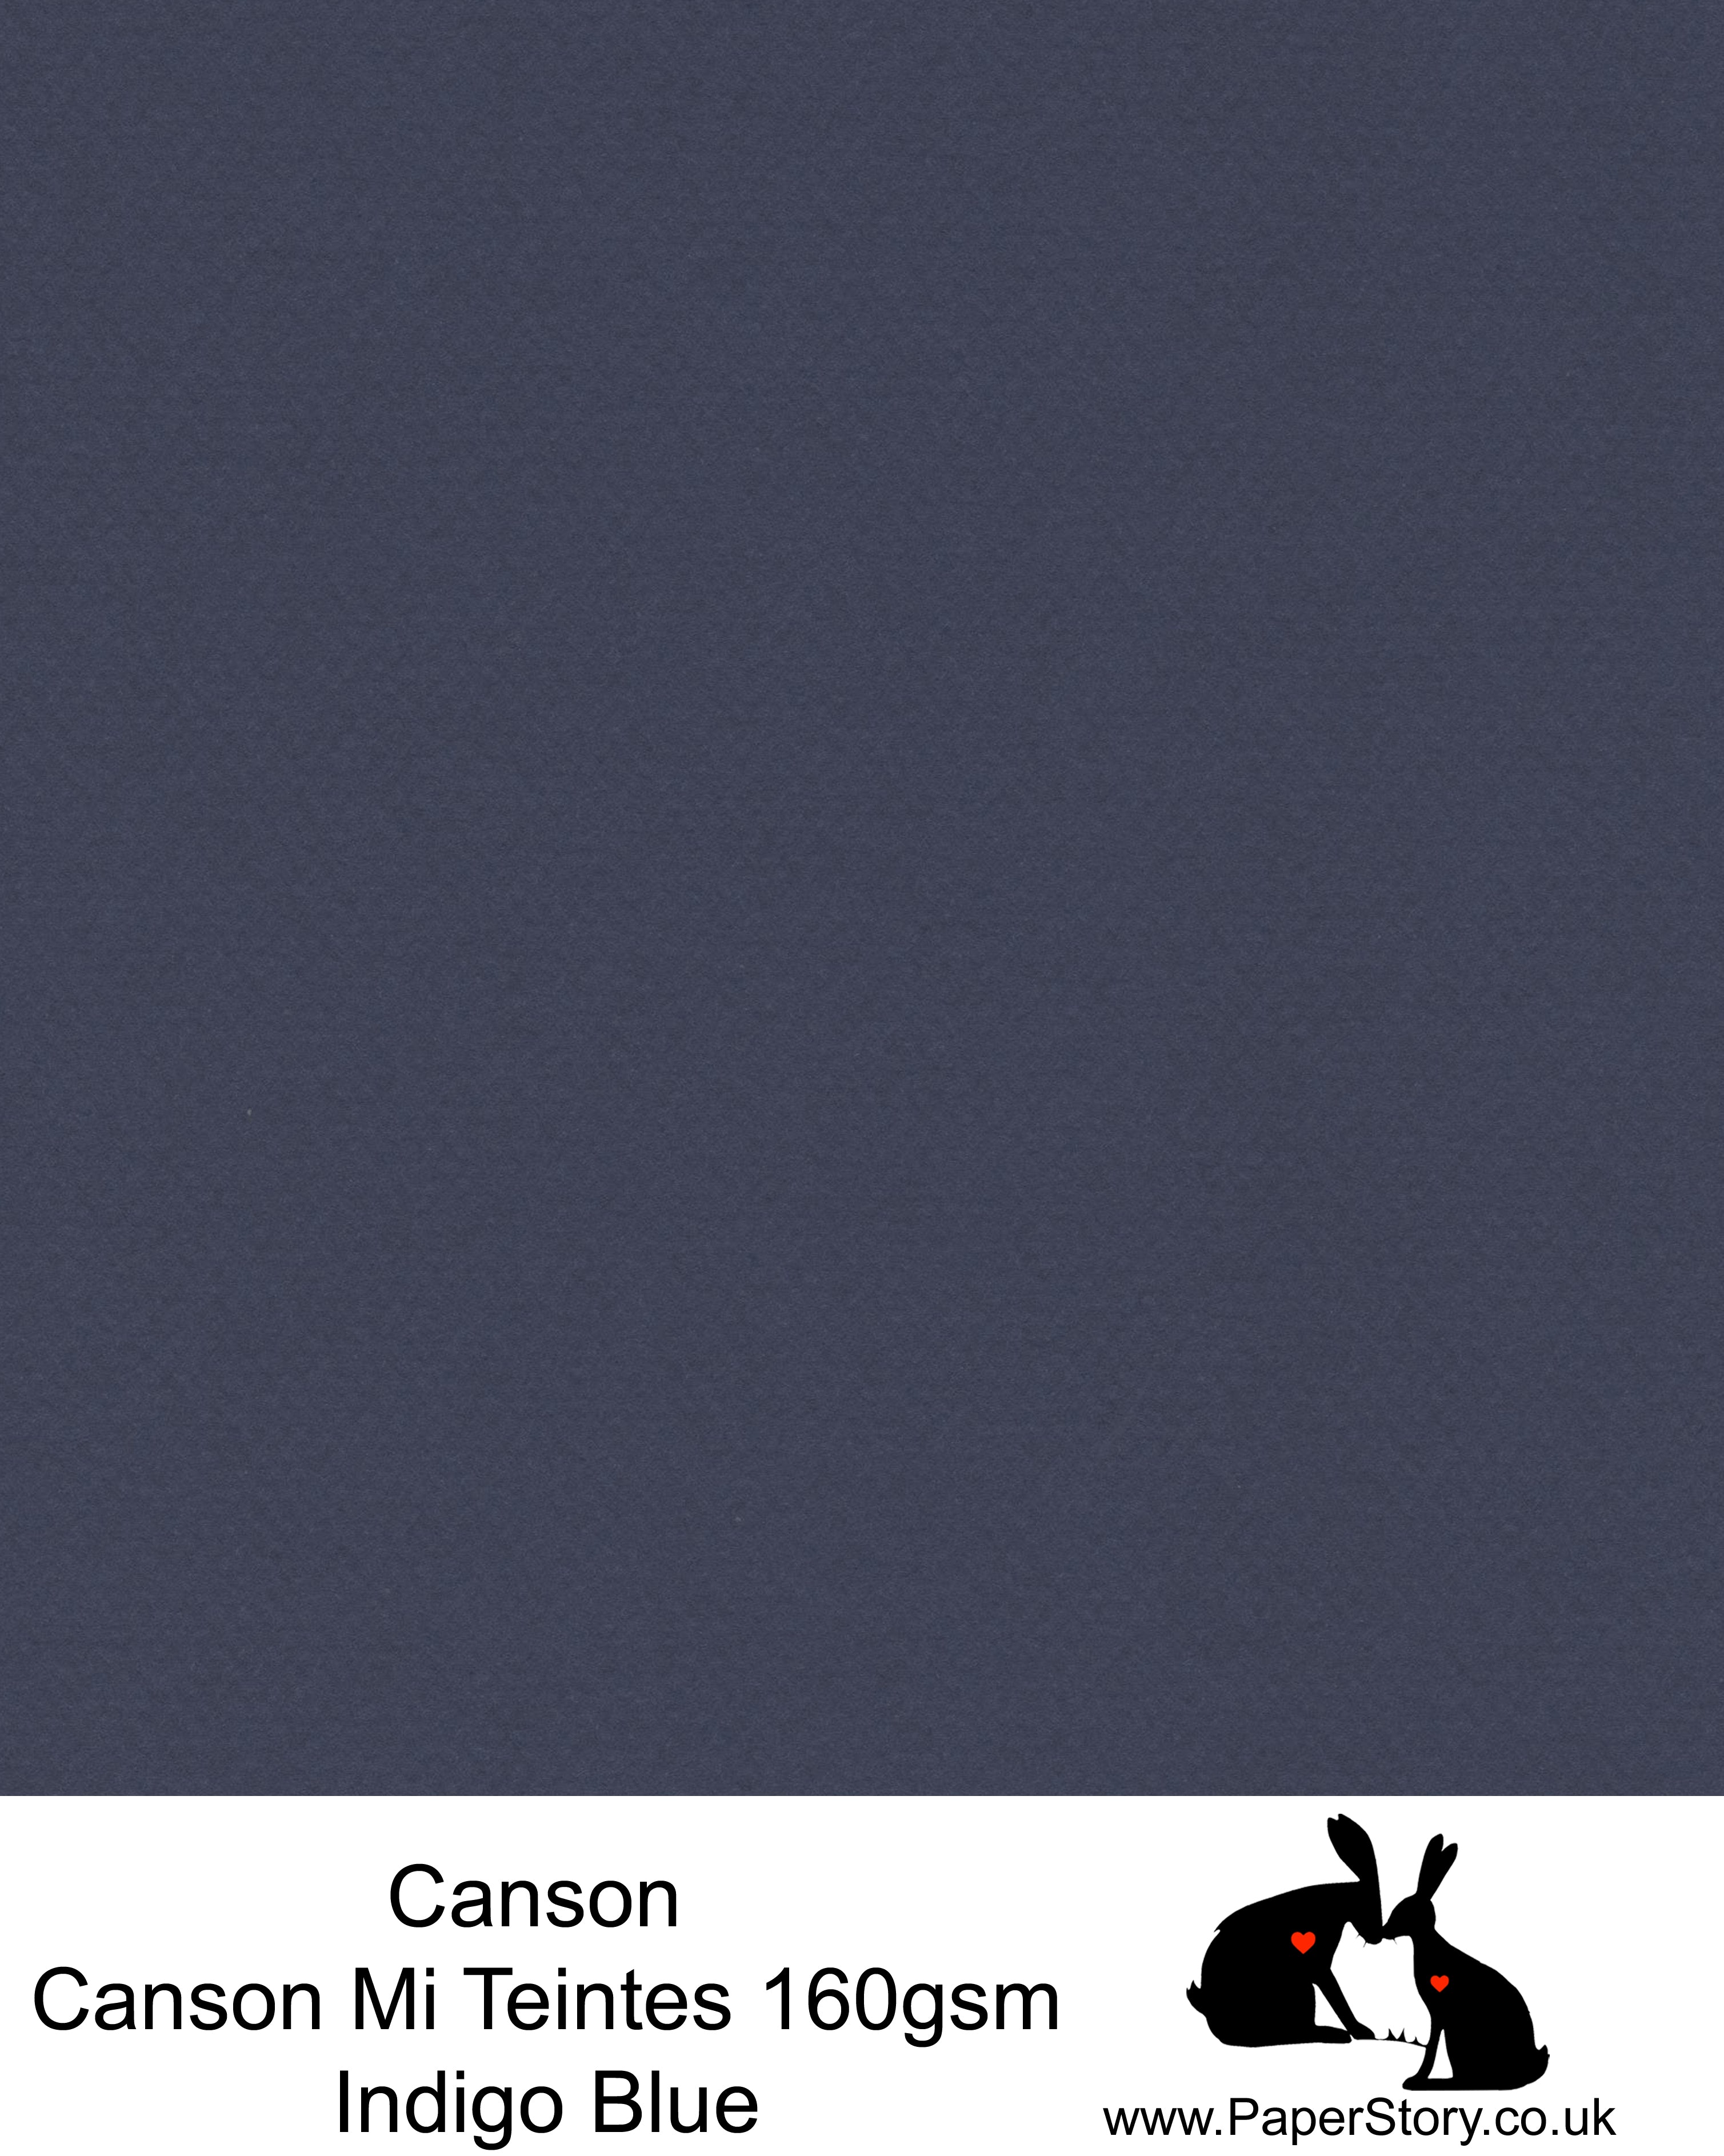 Canson Mi Teintes acid free, deep Navy blue, hammered texture honeycomb surface paper 160 gsm. This is a popular and classic paper for all artists especially well respected for Pastel  and Papercutting made famous by Paper Panda. This paper has a honeycombed finish one side and fine grain the other. An authentic art paper, acid free with a  very high 50% cotton content. Canson Mi-Teintes complies with the ISO 9706 standard on permanence, a guarantee of excellent conservation  